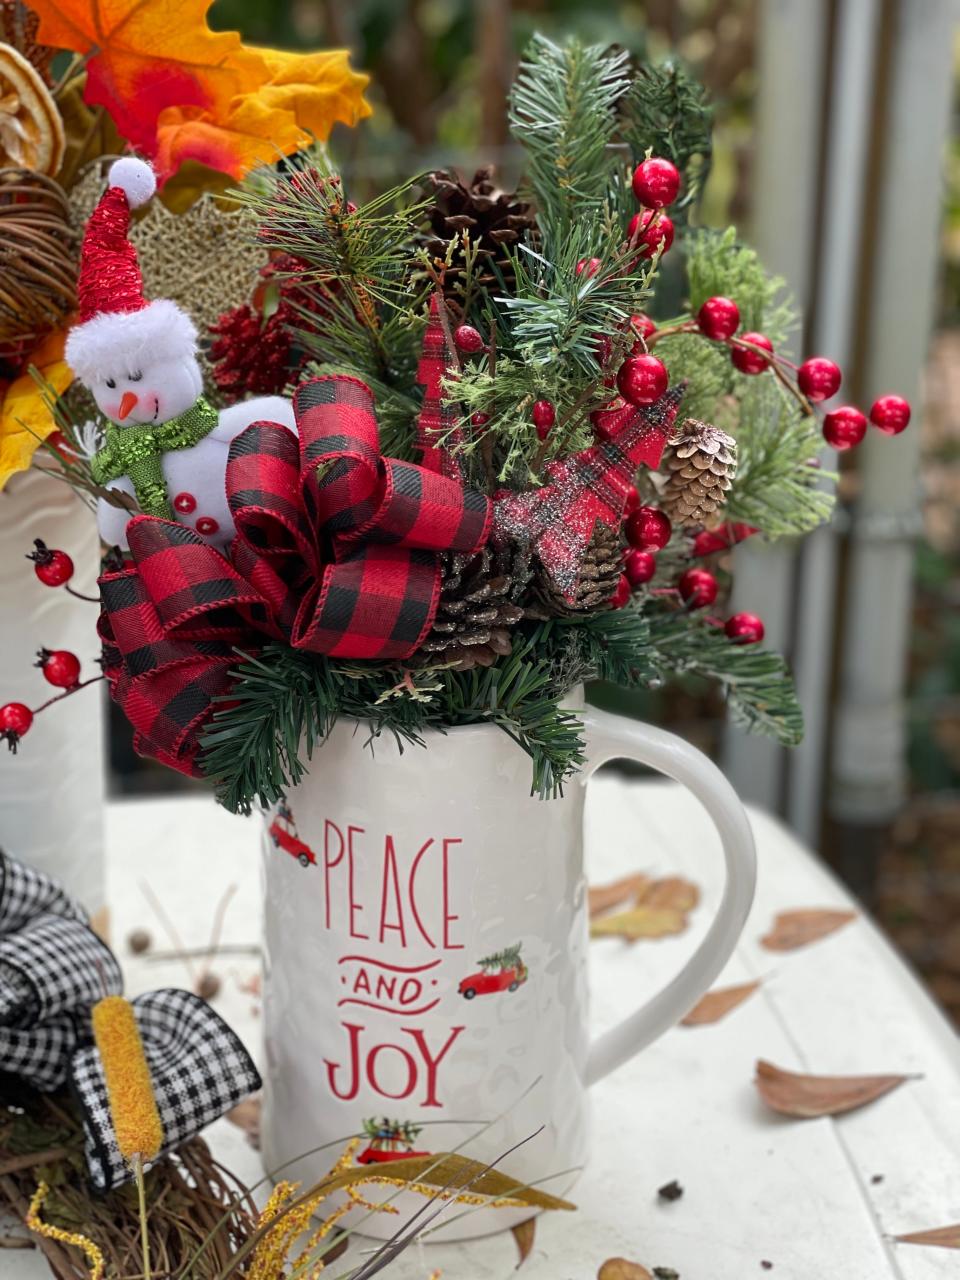 The St. John's Episcopal Church Holiday Market will feature a variety of crafts, holiday items and food on Nov. 17-18, 2023.